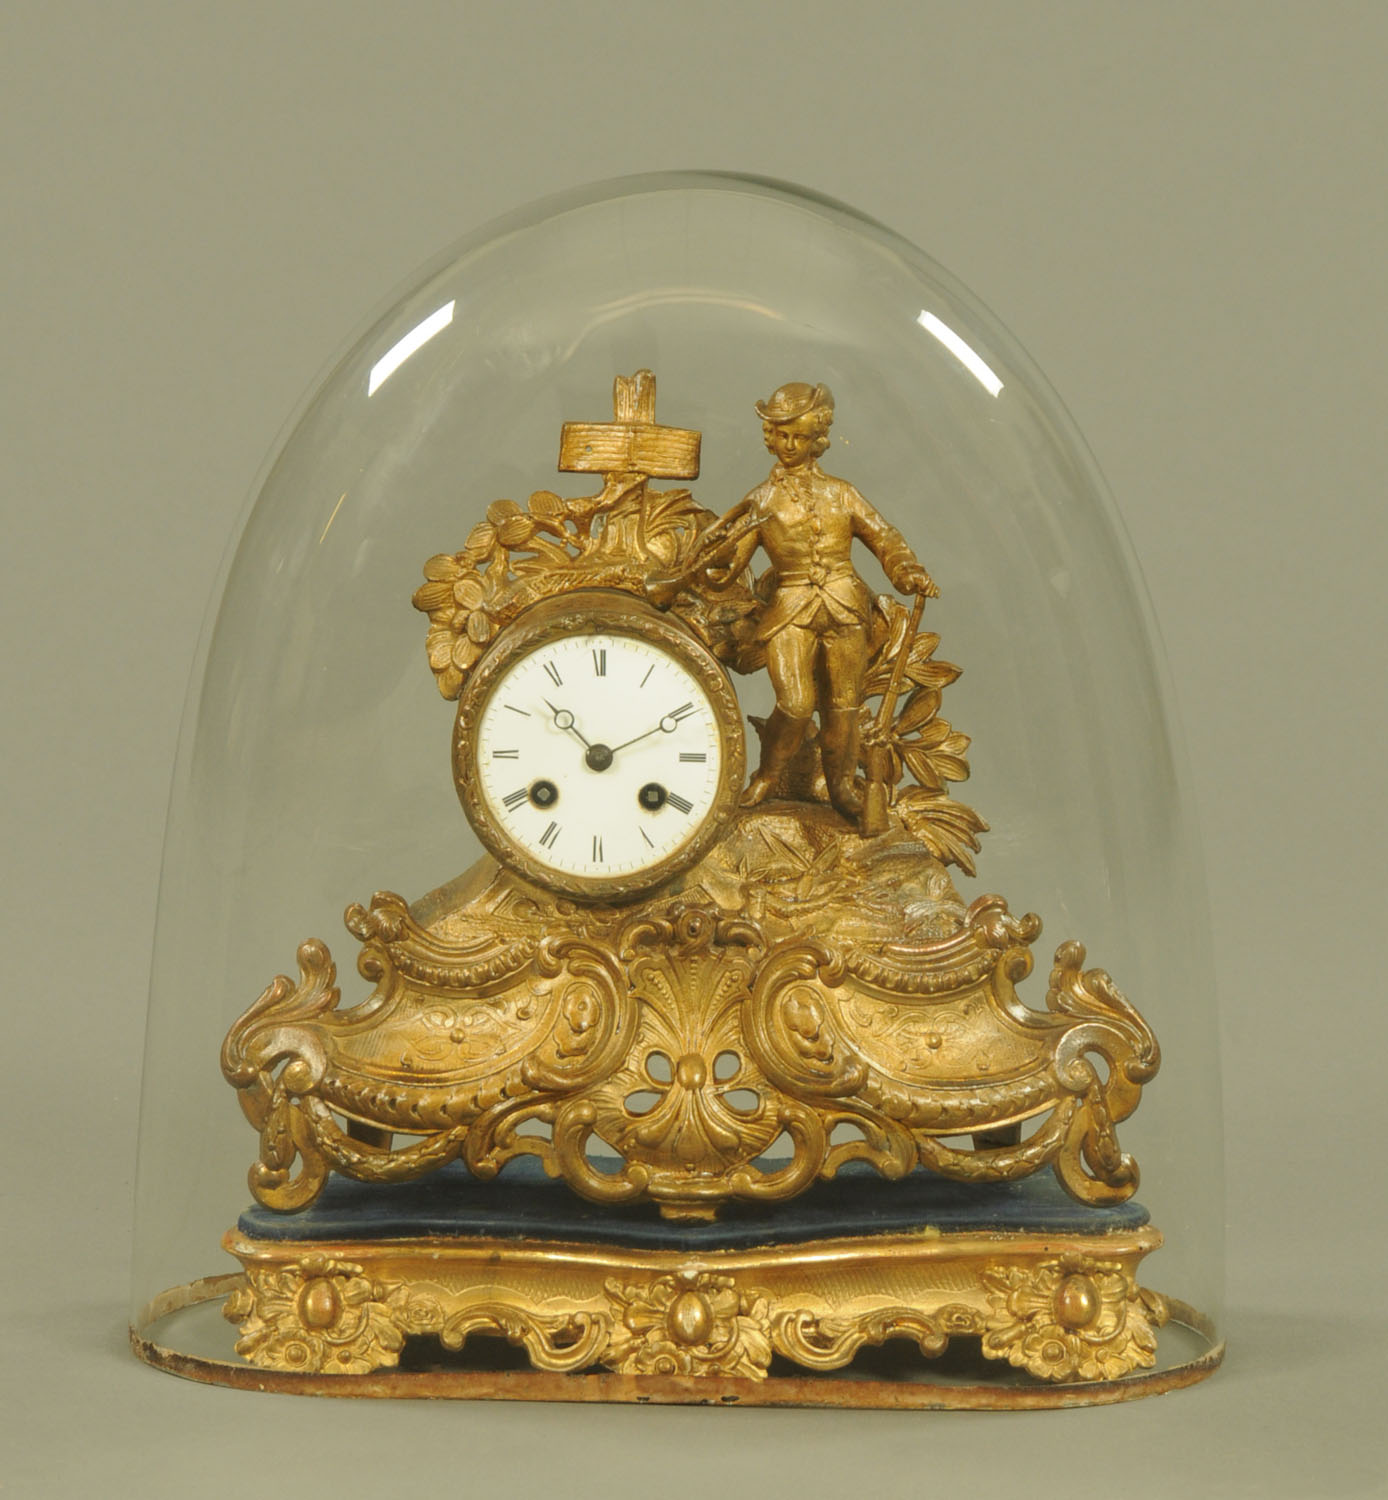 A 19th century French spelter figural mantle clock, with giltwood base and glass dome.